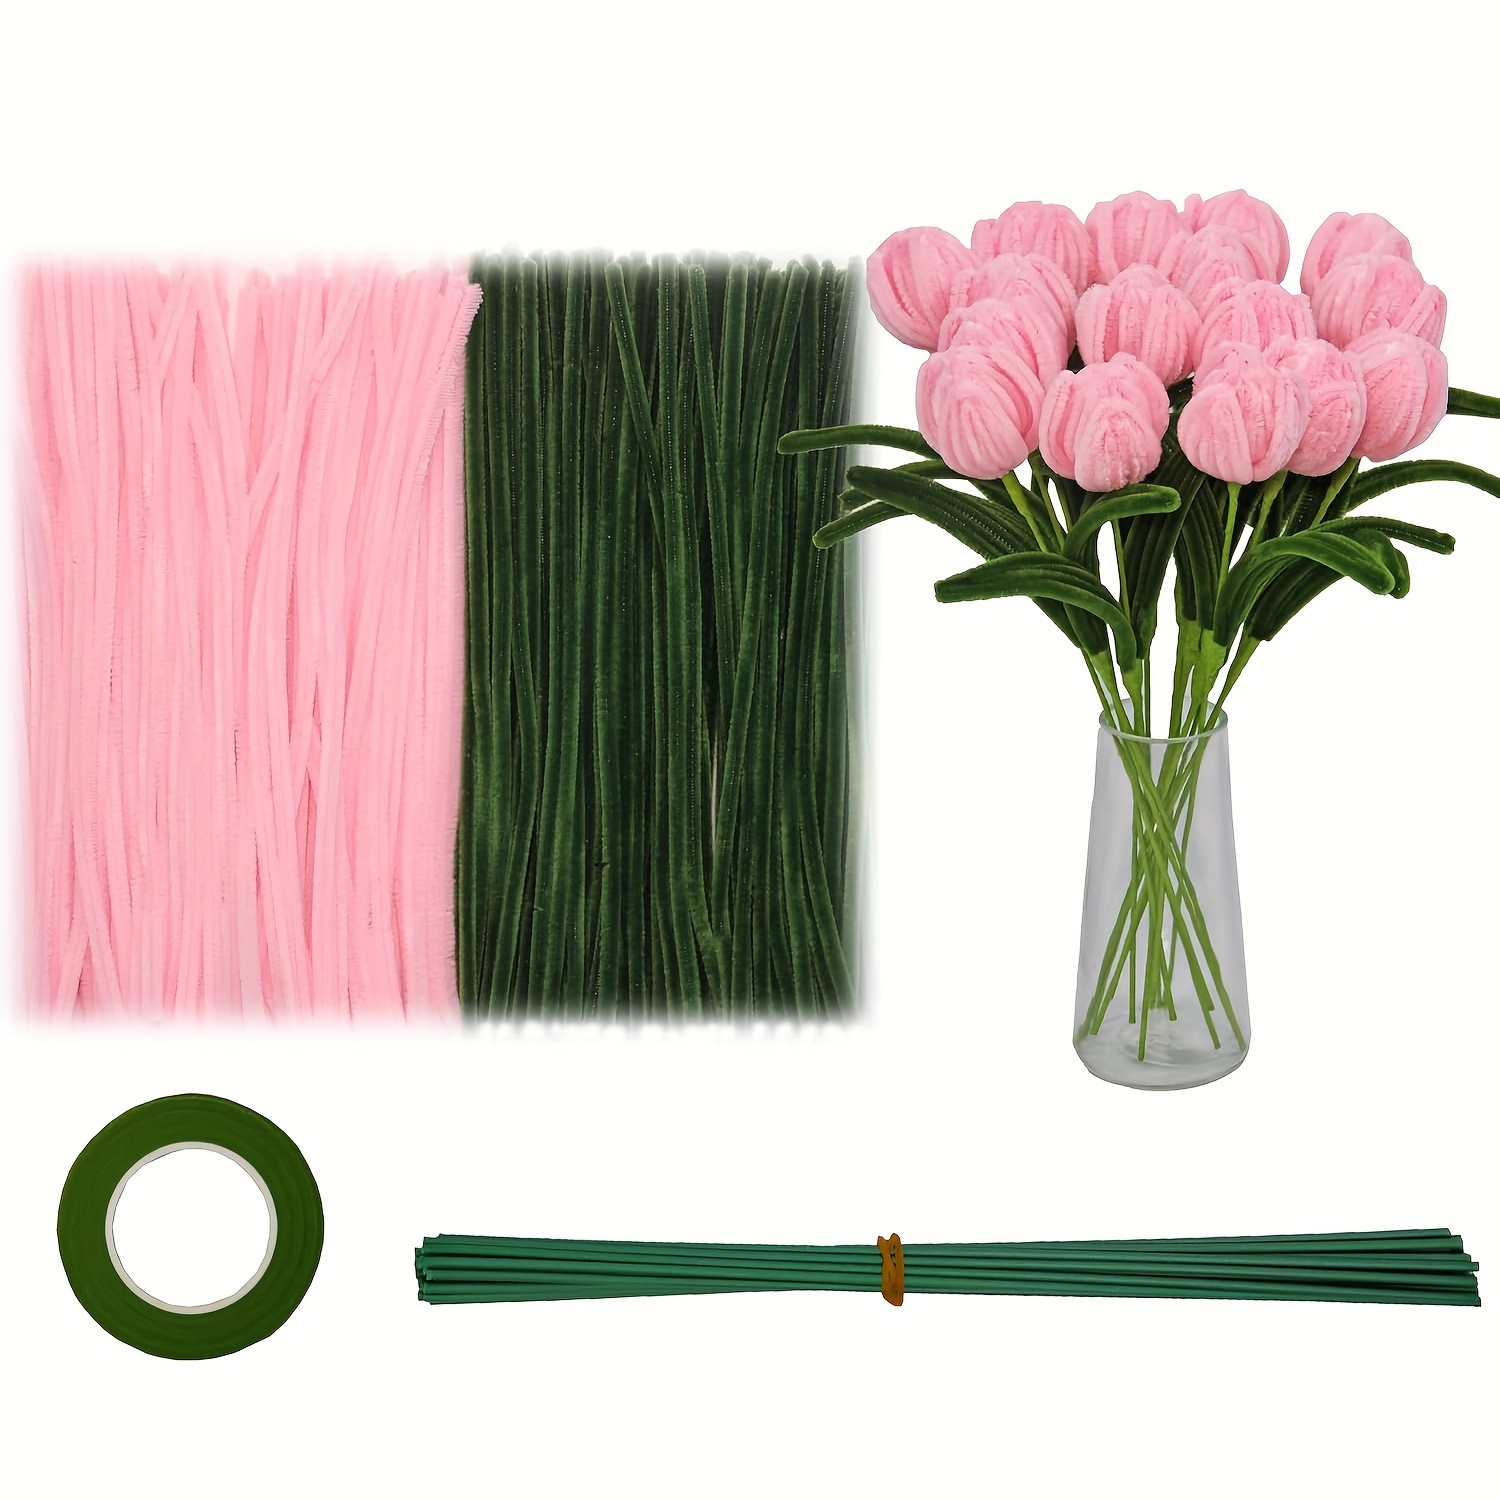  Cldamecy 200 pcs Pink OliveGreen Pipe Cleaners Set with Floral  Wires & Gardening Tape, Chenille Stems Pipecleaners for Tulip Bouquet  Making,Kids DIY Craft Projects and Decorations : Arts, Crafts & Sewing